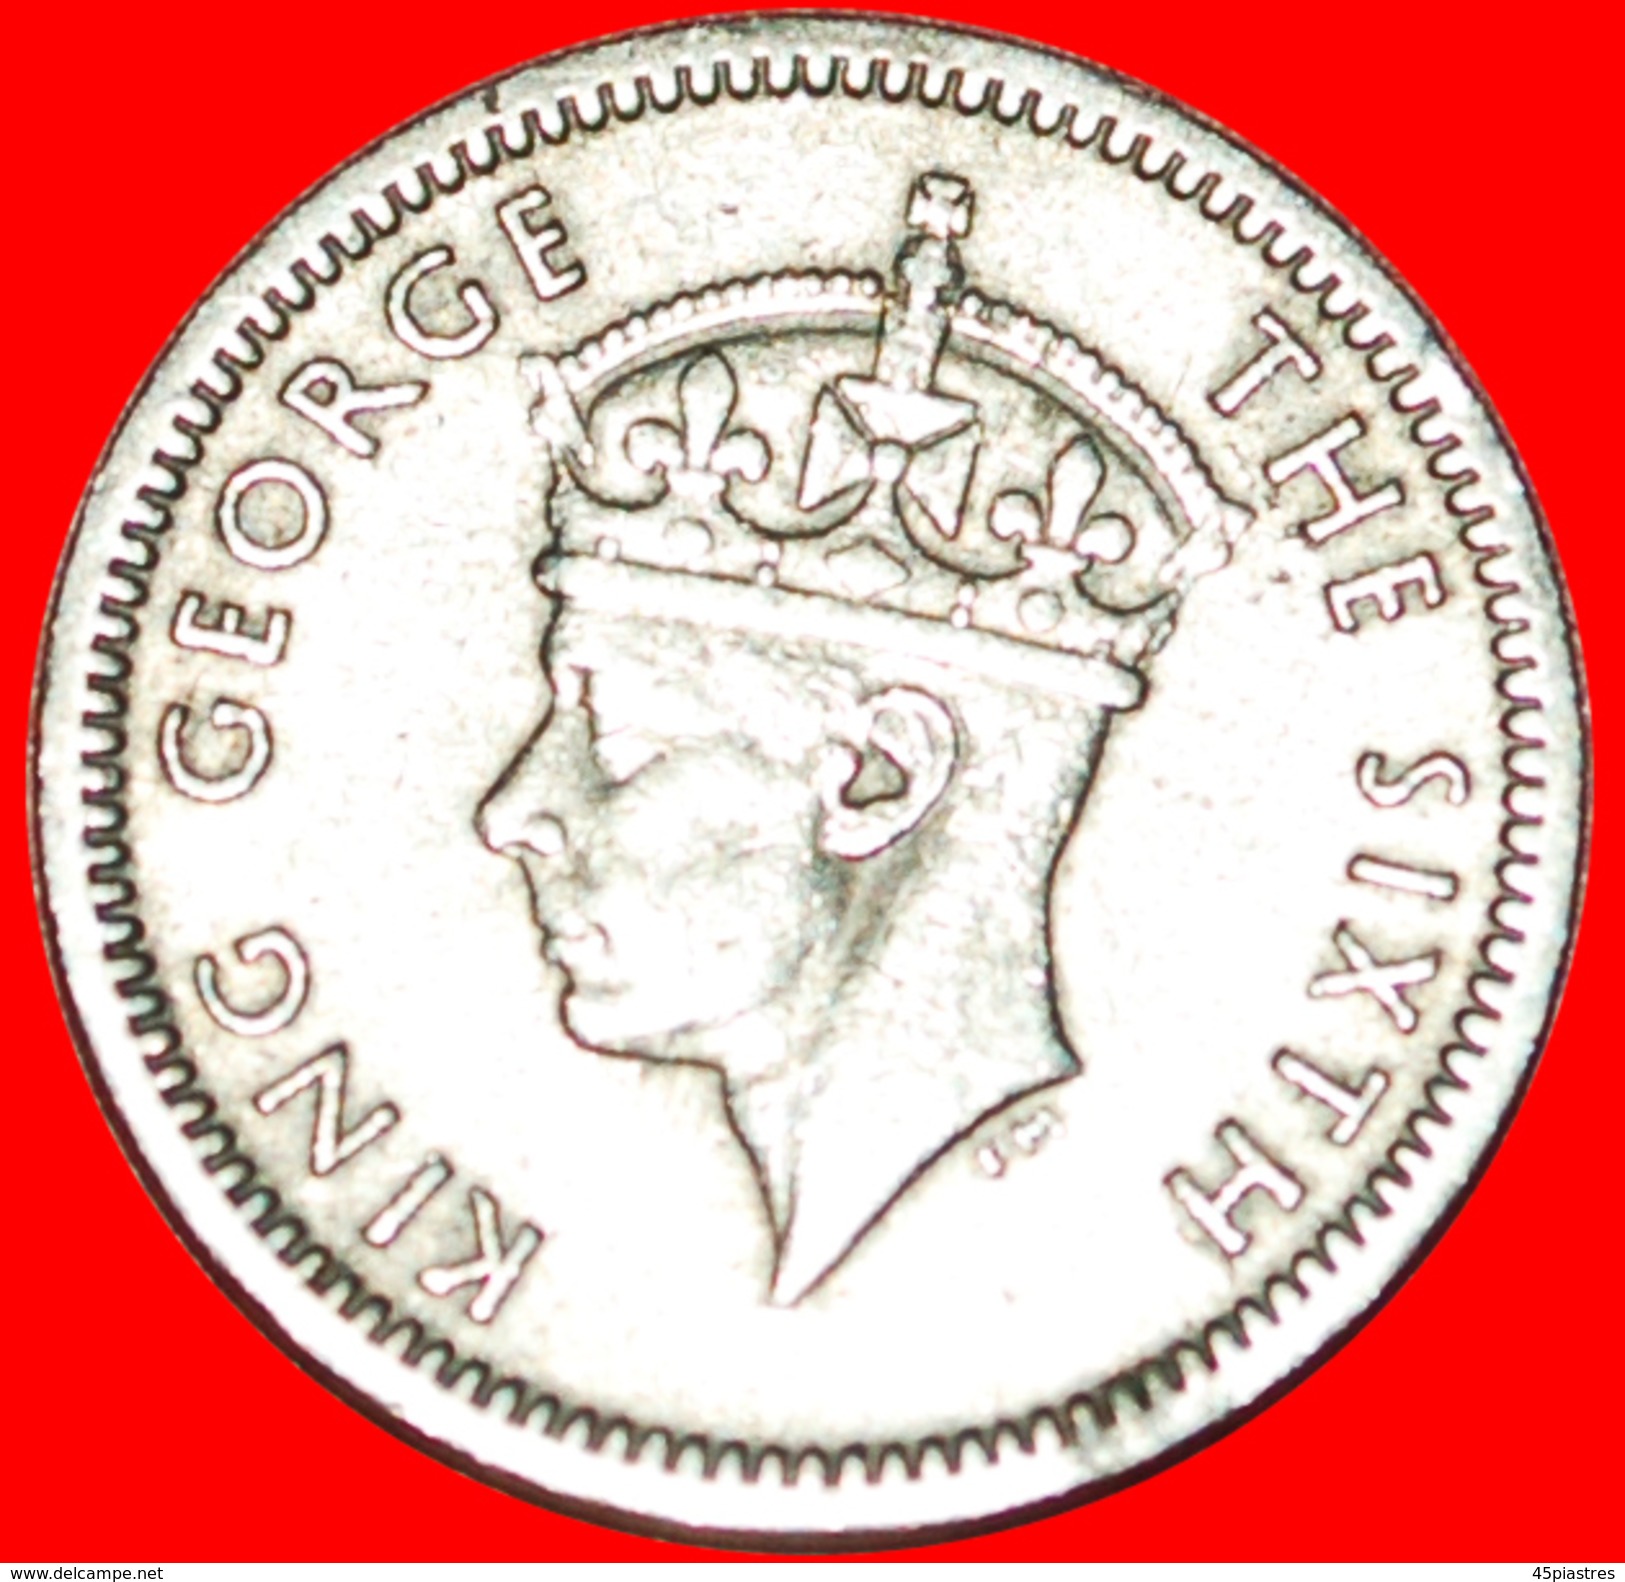 § 3 SPEARS: SOUTHERN RHODESIA &#x2605; 3 PENCE 1948!LOW START&#x2605; NO RESERVE! - Rhodesia